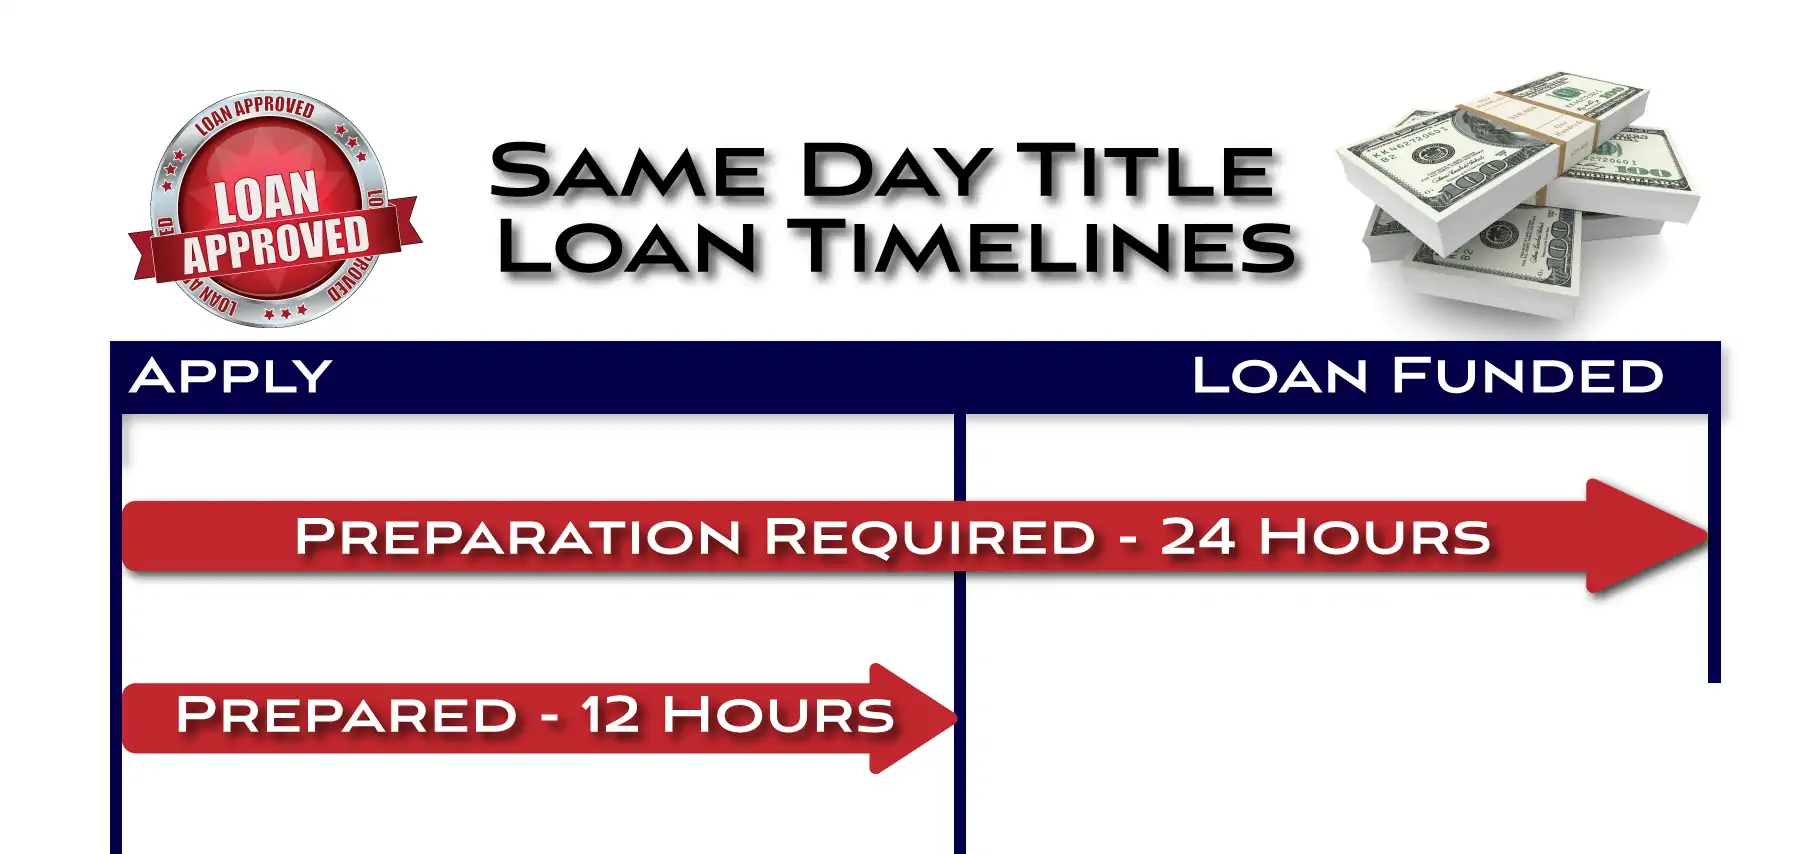 Same Day Title Loan Funding Times